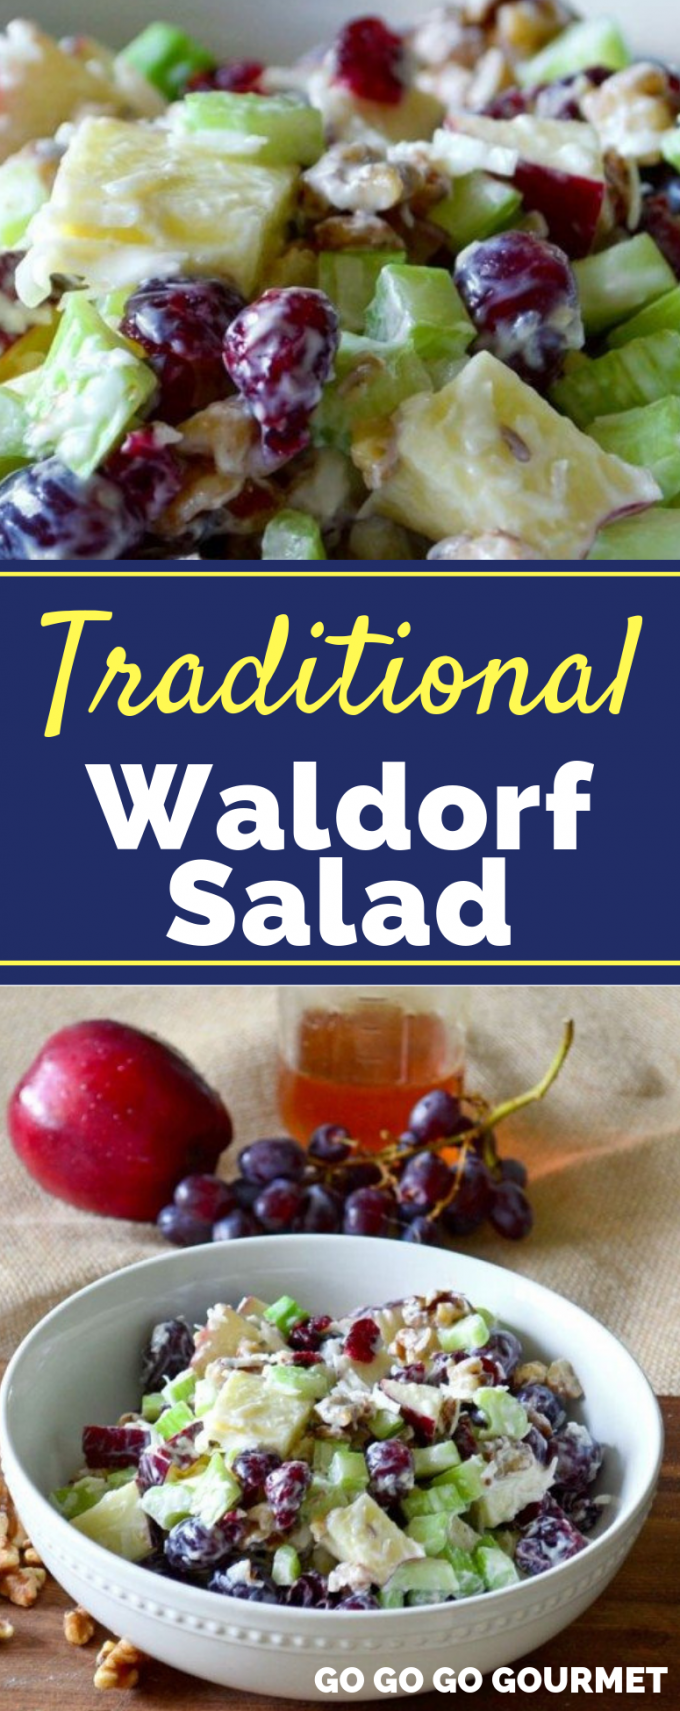 This traditional Waldorf Salad recipe is a healthy dish to bring along to summer BBQ's. It has an easy dressing made with yogurt, mayonnaise, honey and lime juice that is to die for! Chock full of apples, grapes and walnuts, it's not to be missed! #gogogogourmet #waldorfsalad #traditionalwaldorfsaladrecipe #easysummersalads via @gogogogourmet